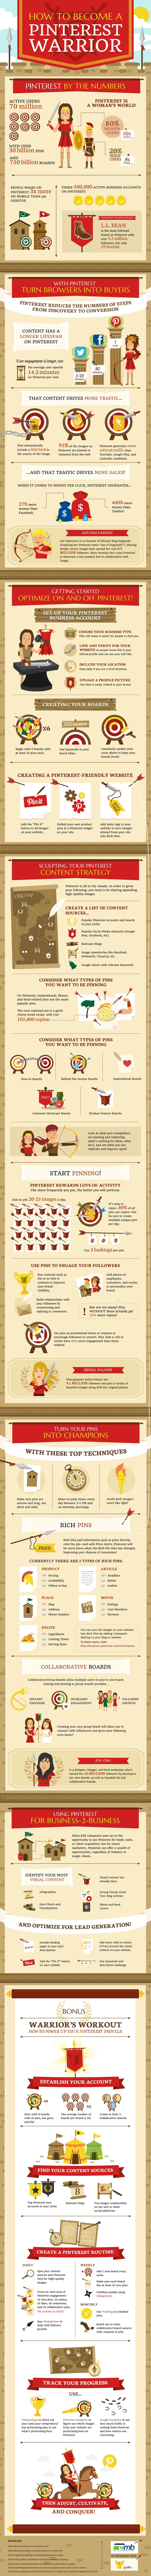 How to become Pinterest Warrior infographic